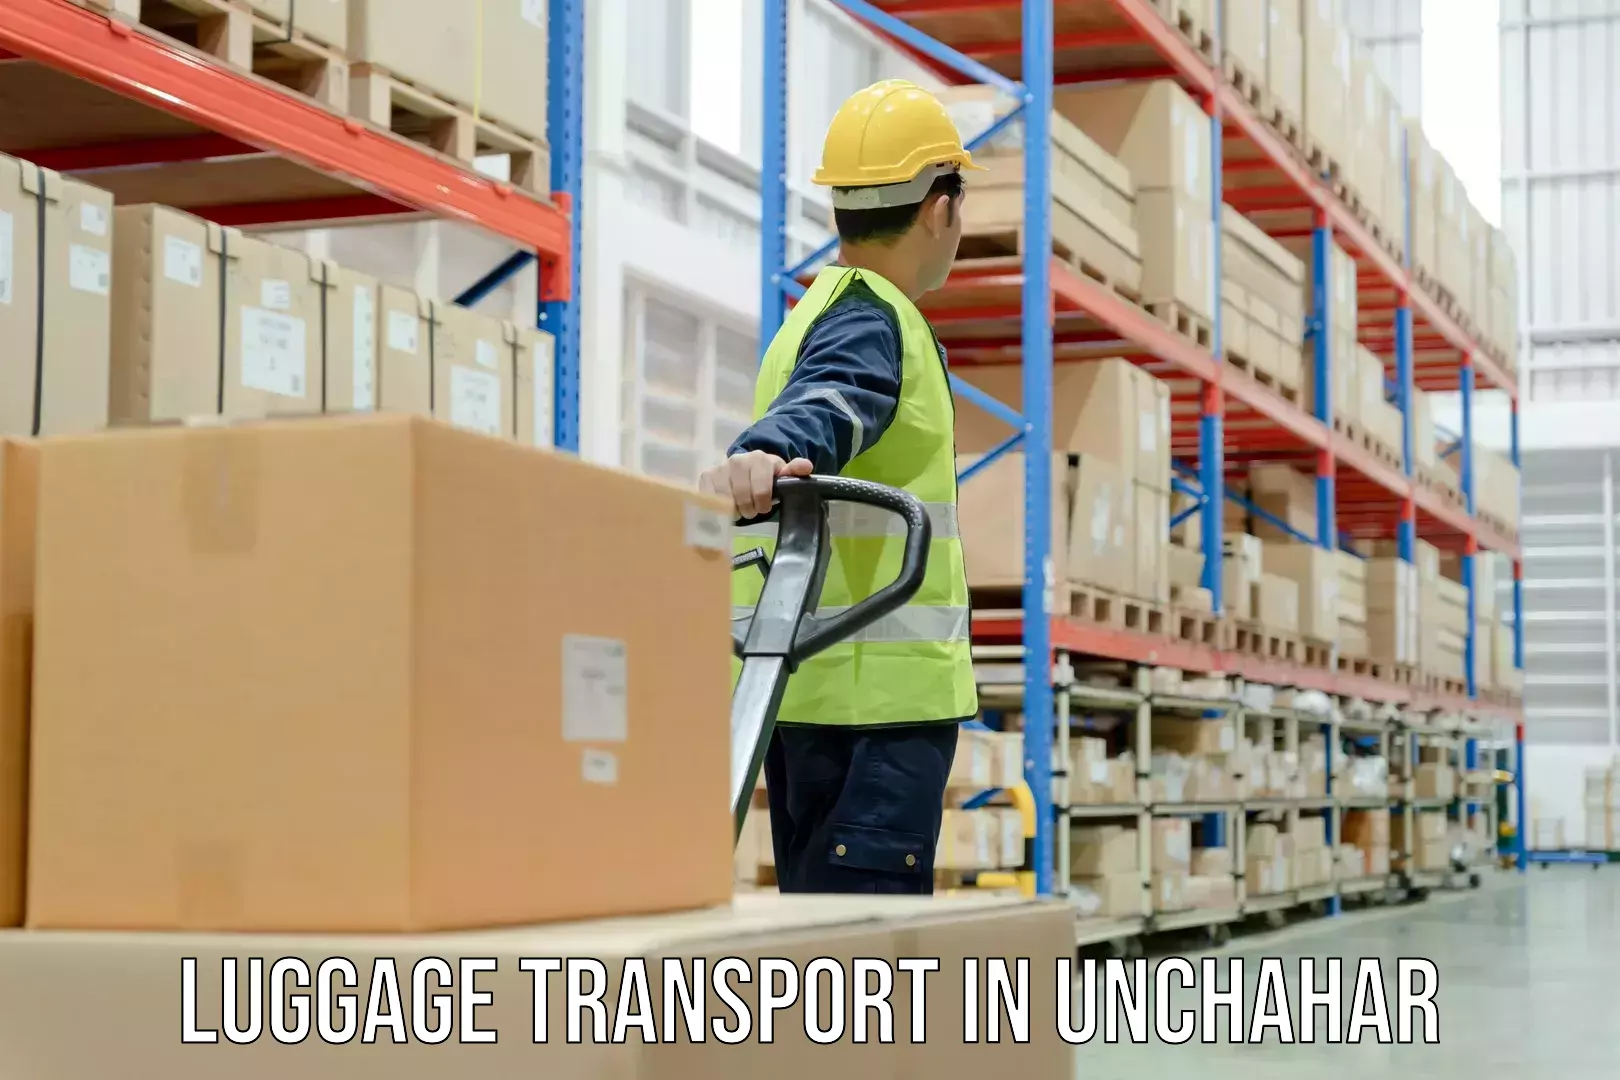 Luggage dispatch service in Unchahar